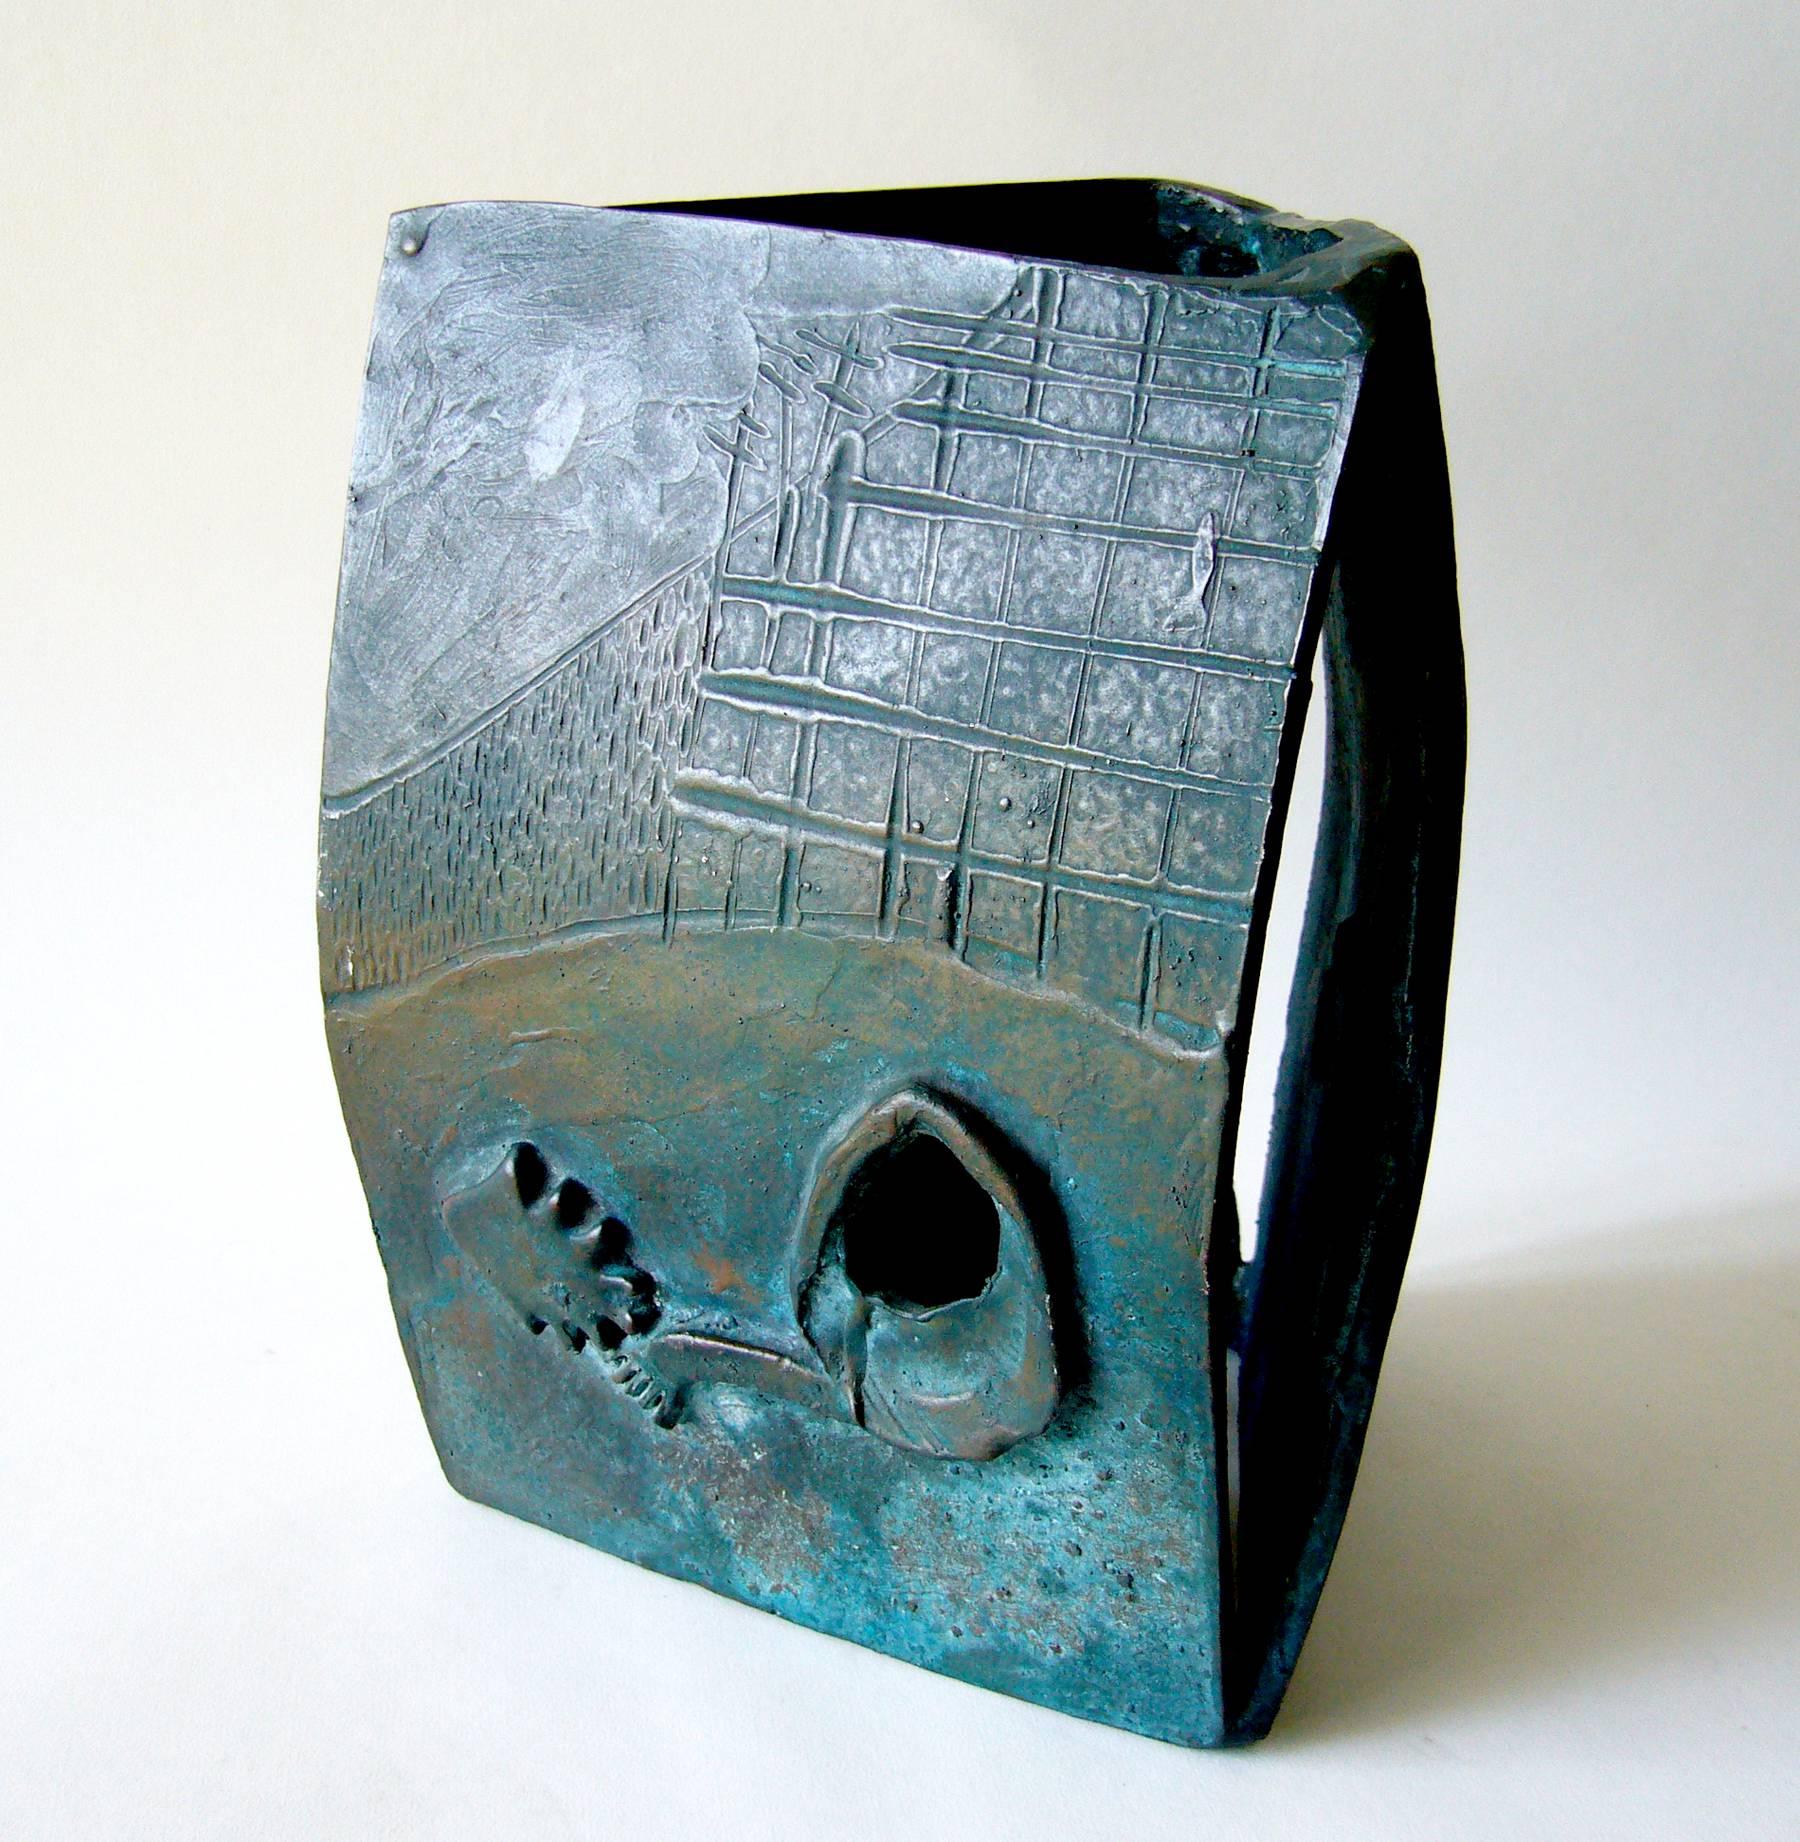 Heavy, three-sided cast bronze sculpture in Asian modernist style. Sculpture measures 9.5